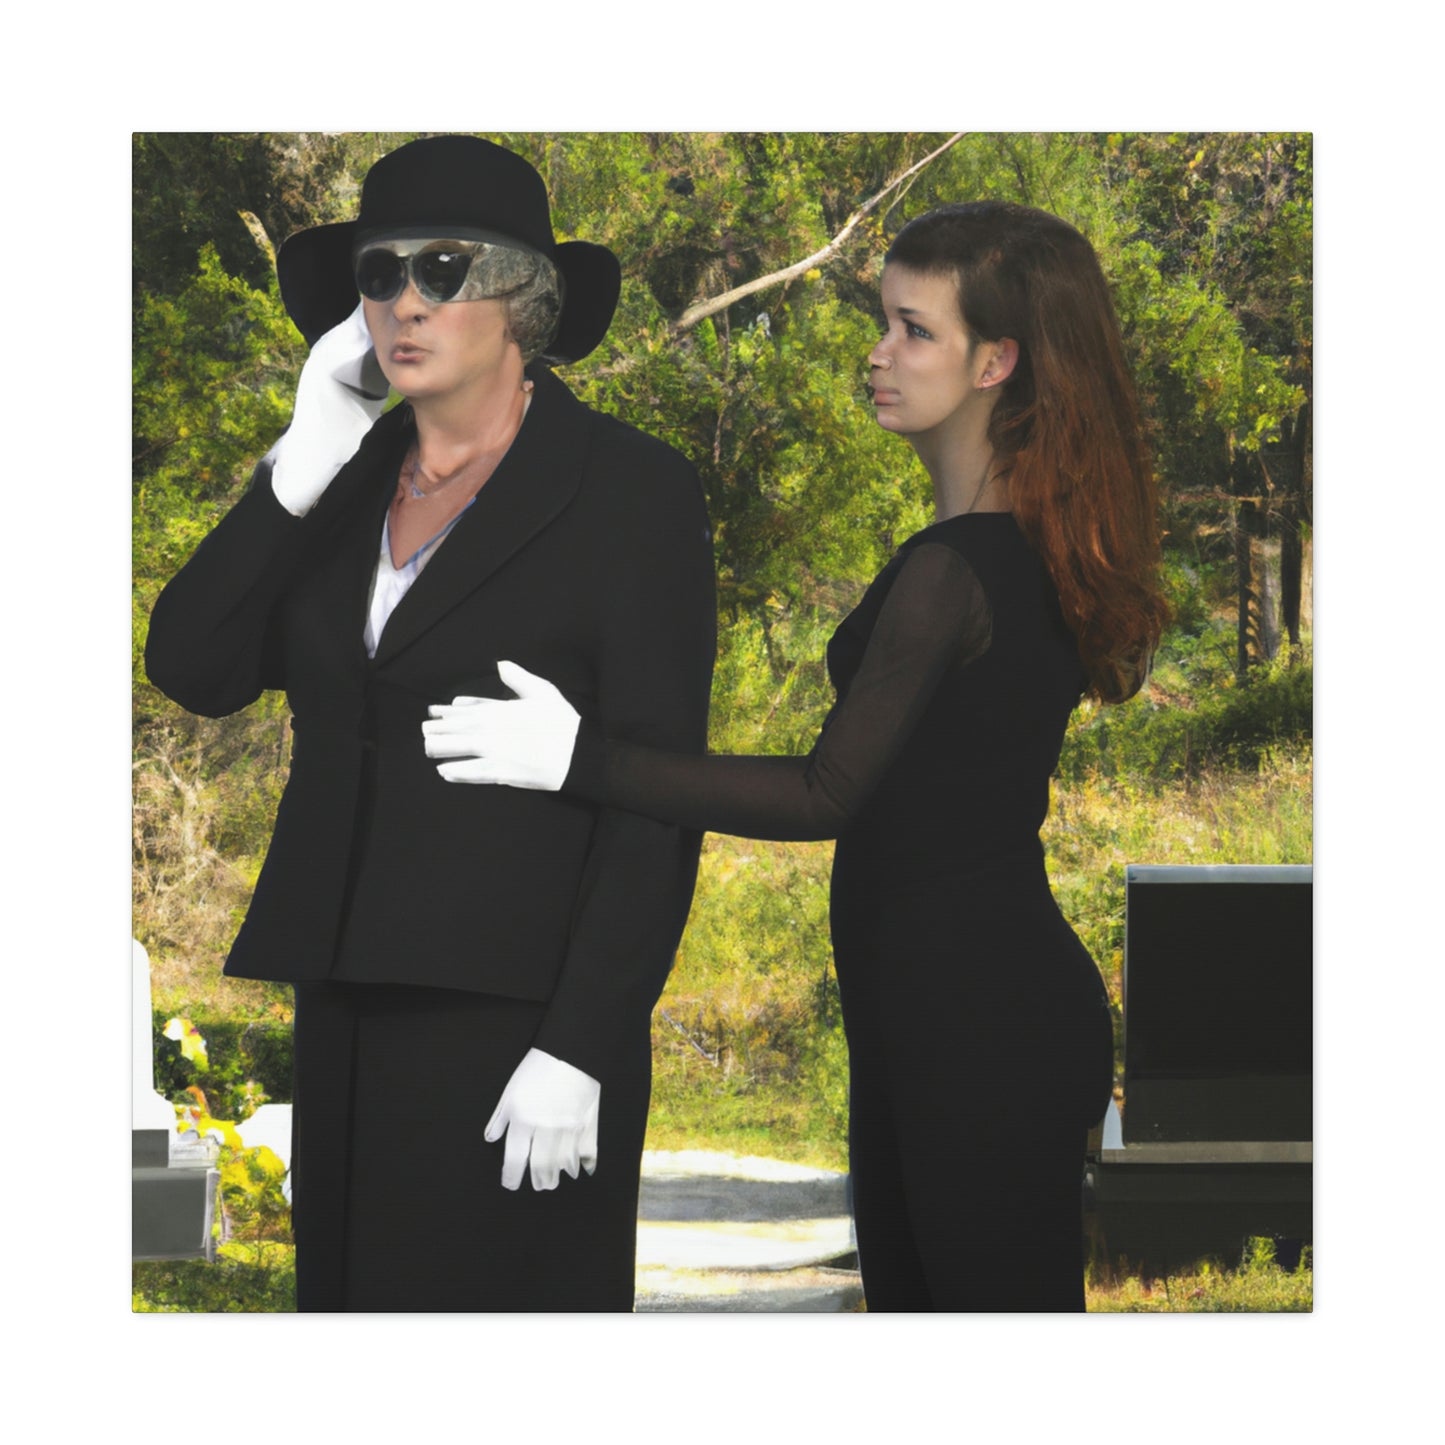 "The Funeral Director's Search" - The Alien Canva